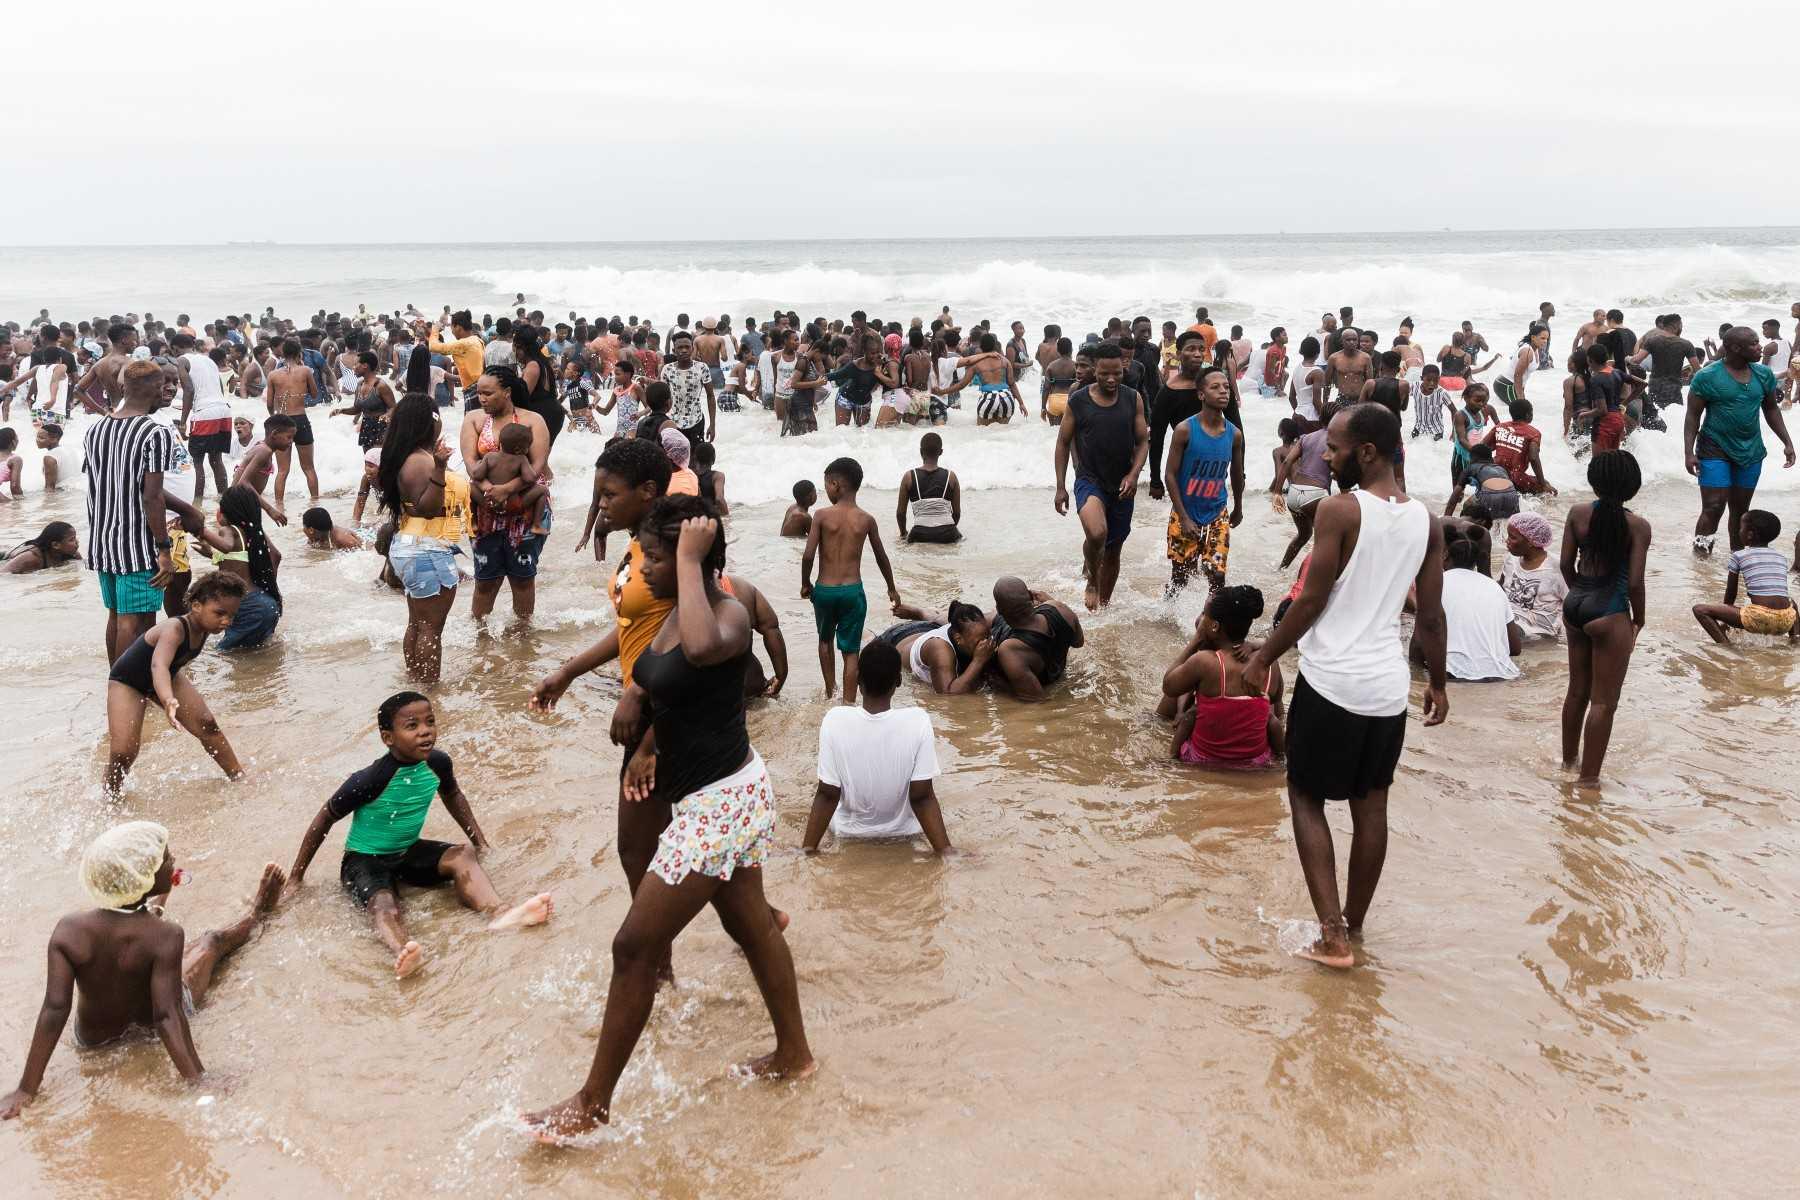 People swim in the ocean along Durban's Golden Mile beach front in Durban on Dec 16, 2021, amidst rising daily Covid-19 cases. Photo: AFP